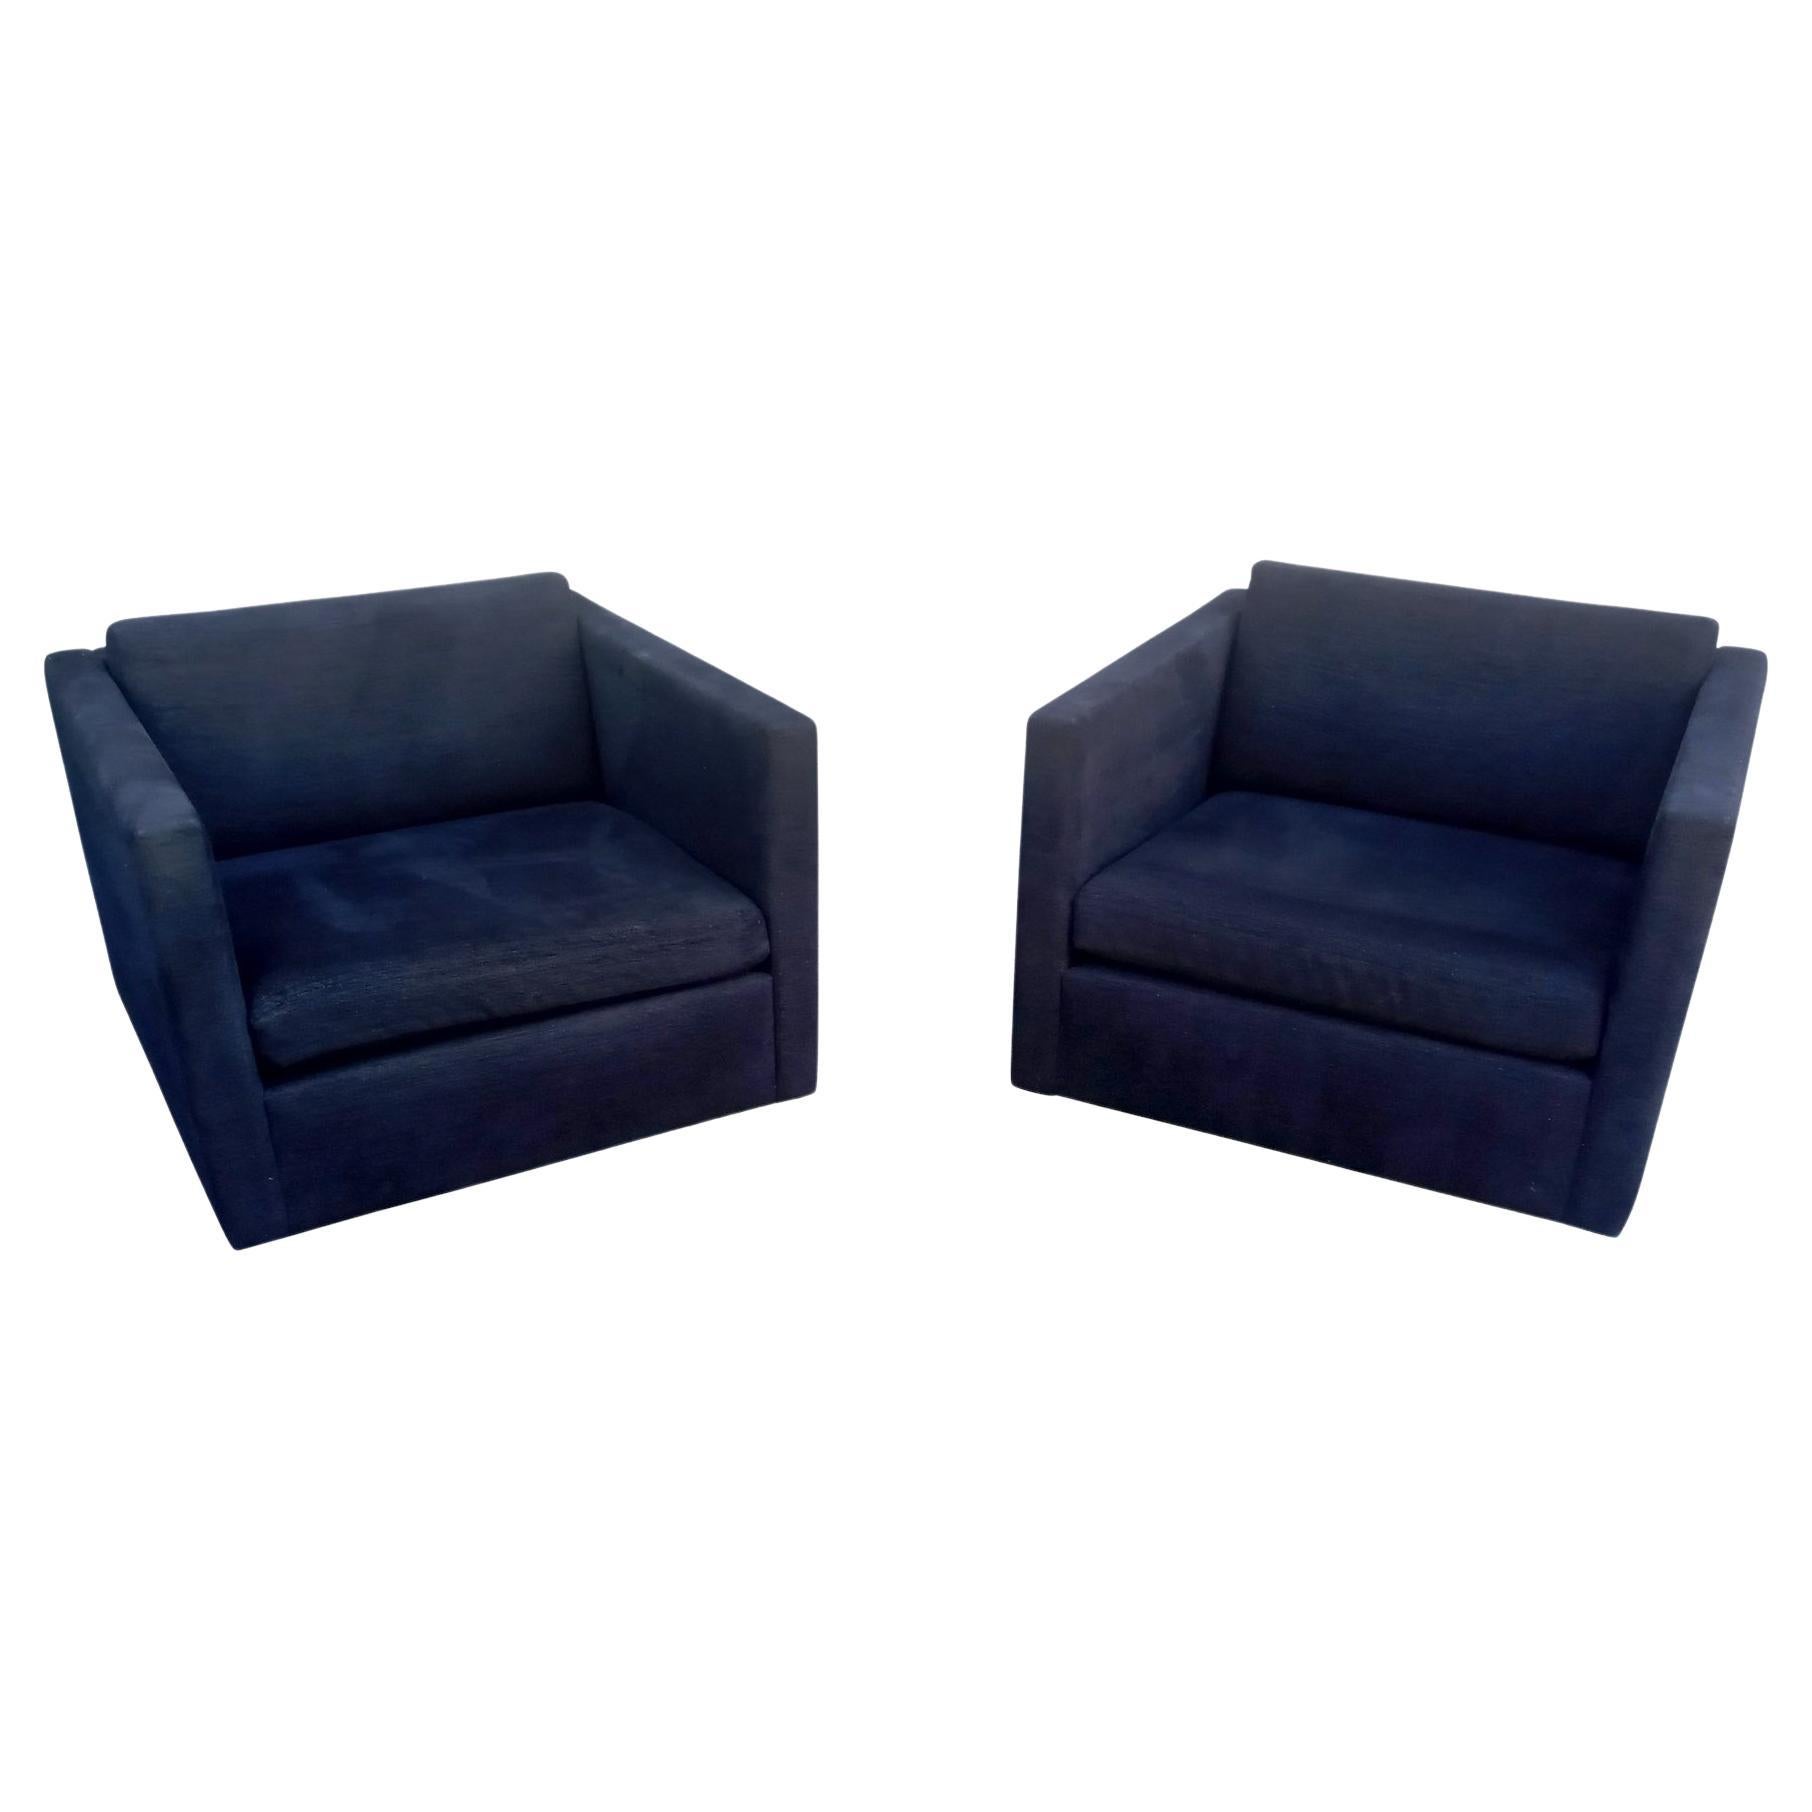 Pair Charles Pfister - Knoll, Tuxedo Club or Lounge Chairs Mid-Century Classics  For Sale